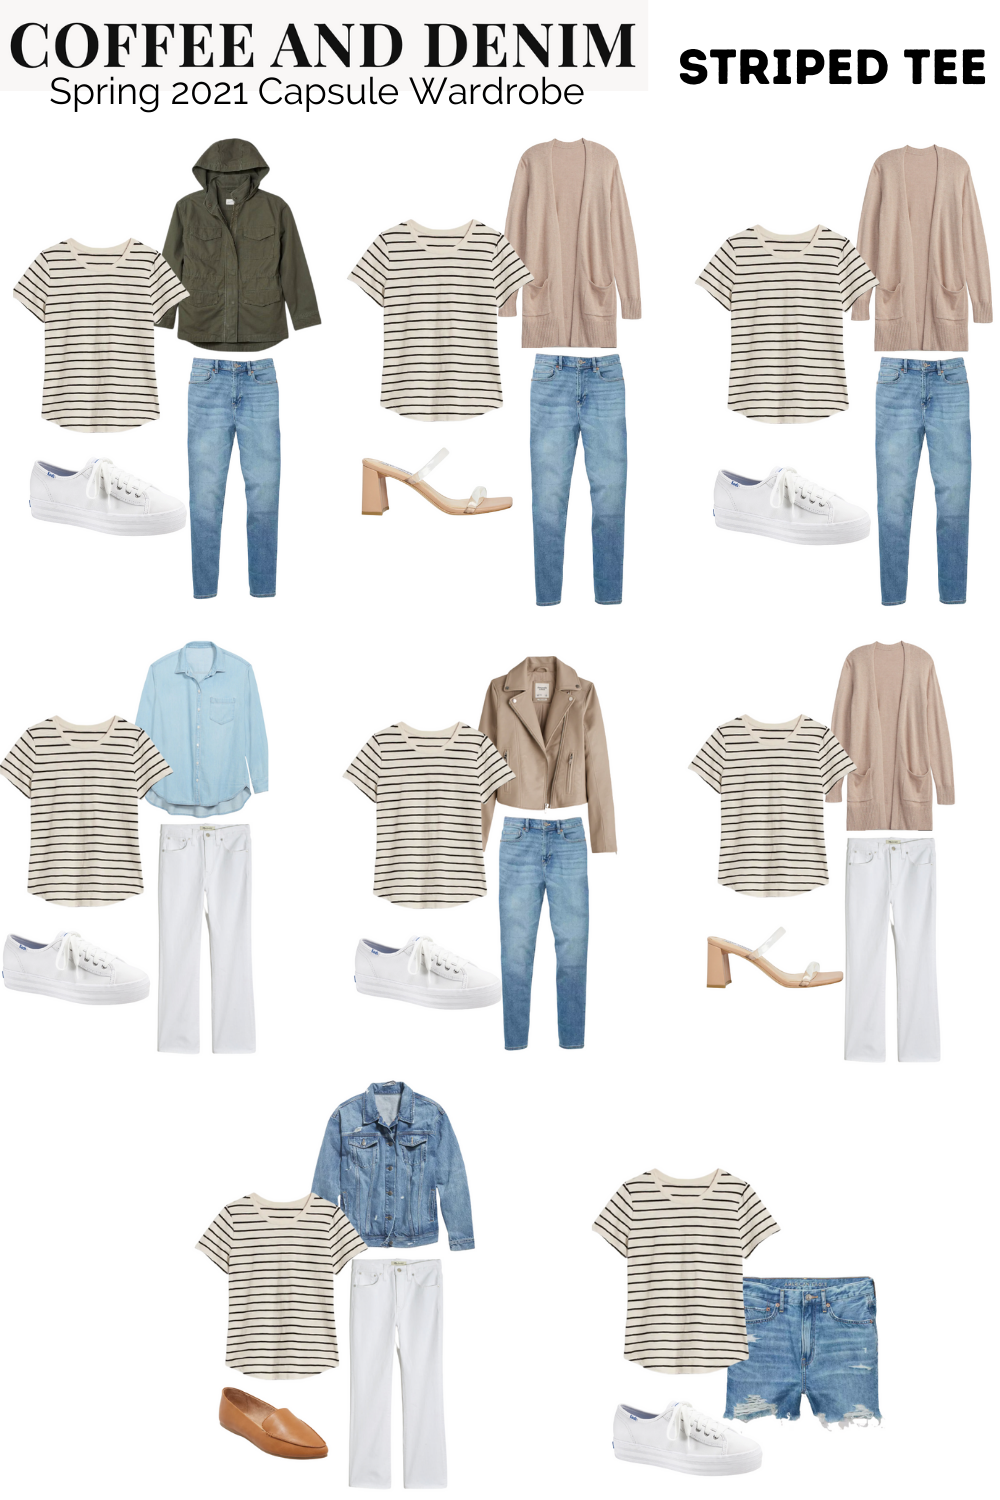 How to style a striped t-shirt multiple ways